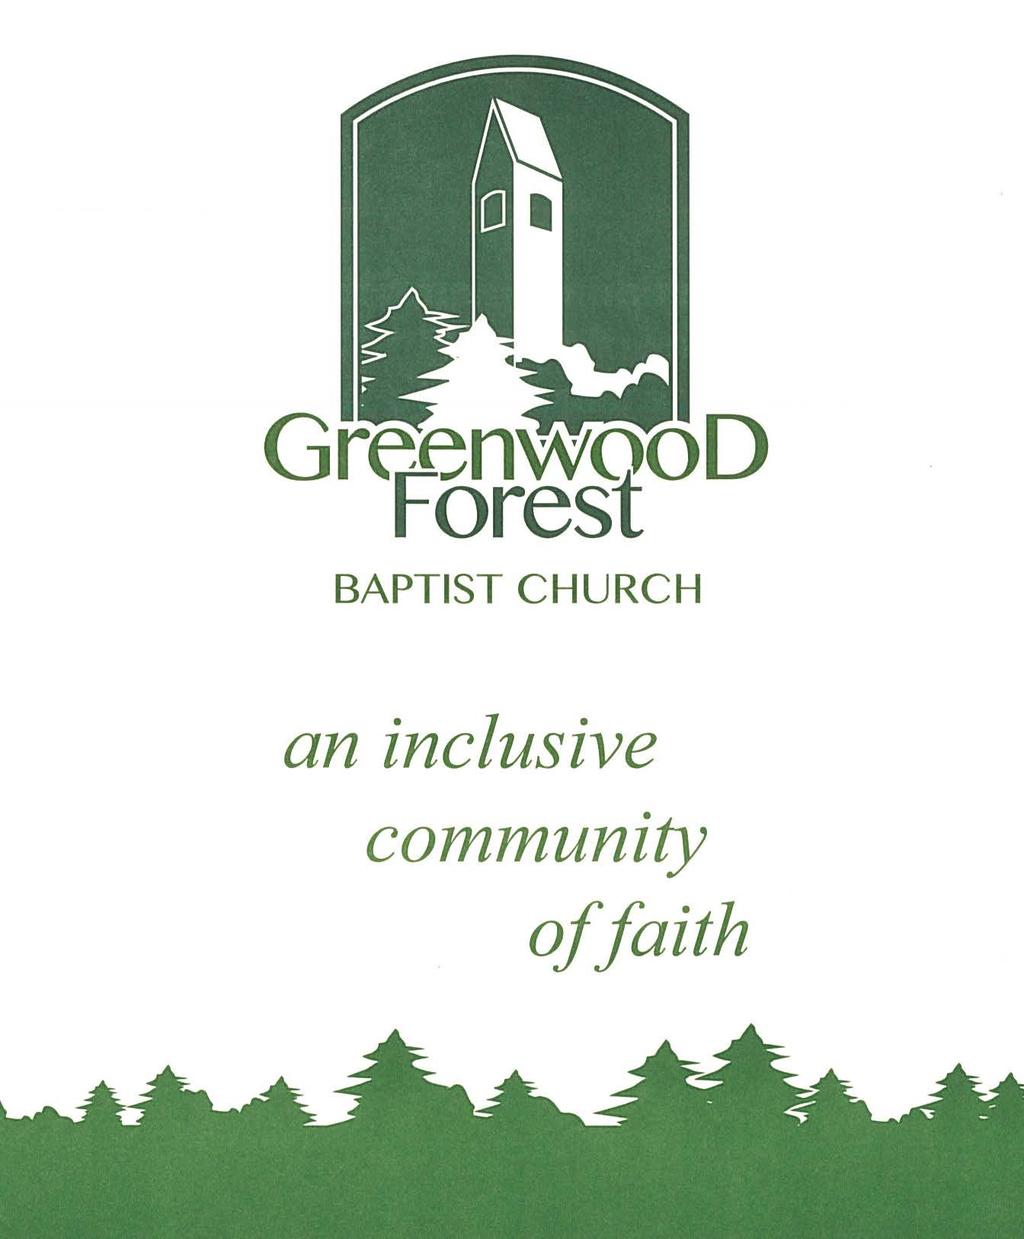 Chiming of the Hour GREENWOOD FOREST BAPTIST CHURCH The Worship of God The Sixteenth Sunday of Pentecost September 24, 2017 Gathering Hymn 550 (v.